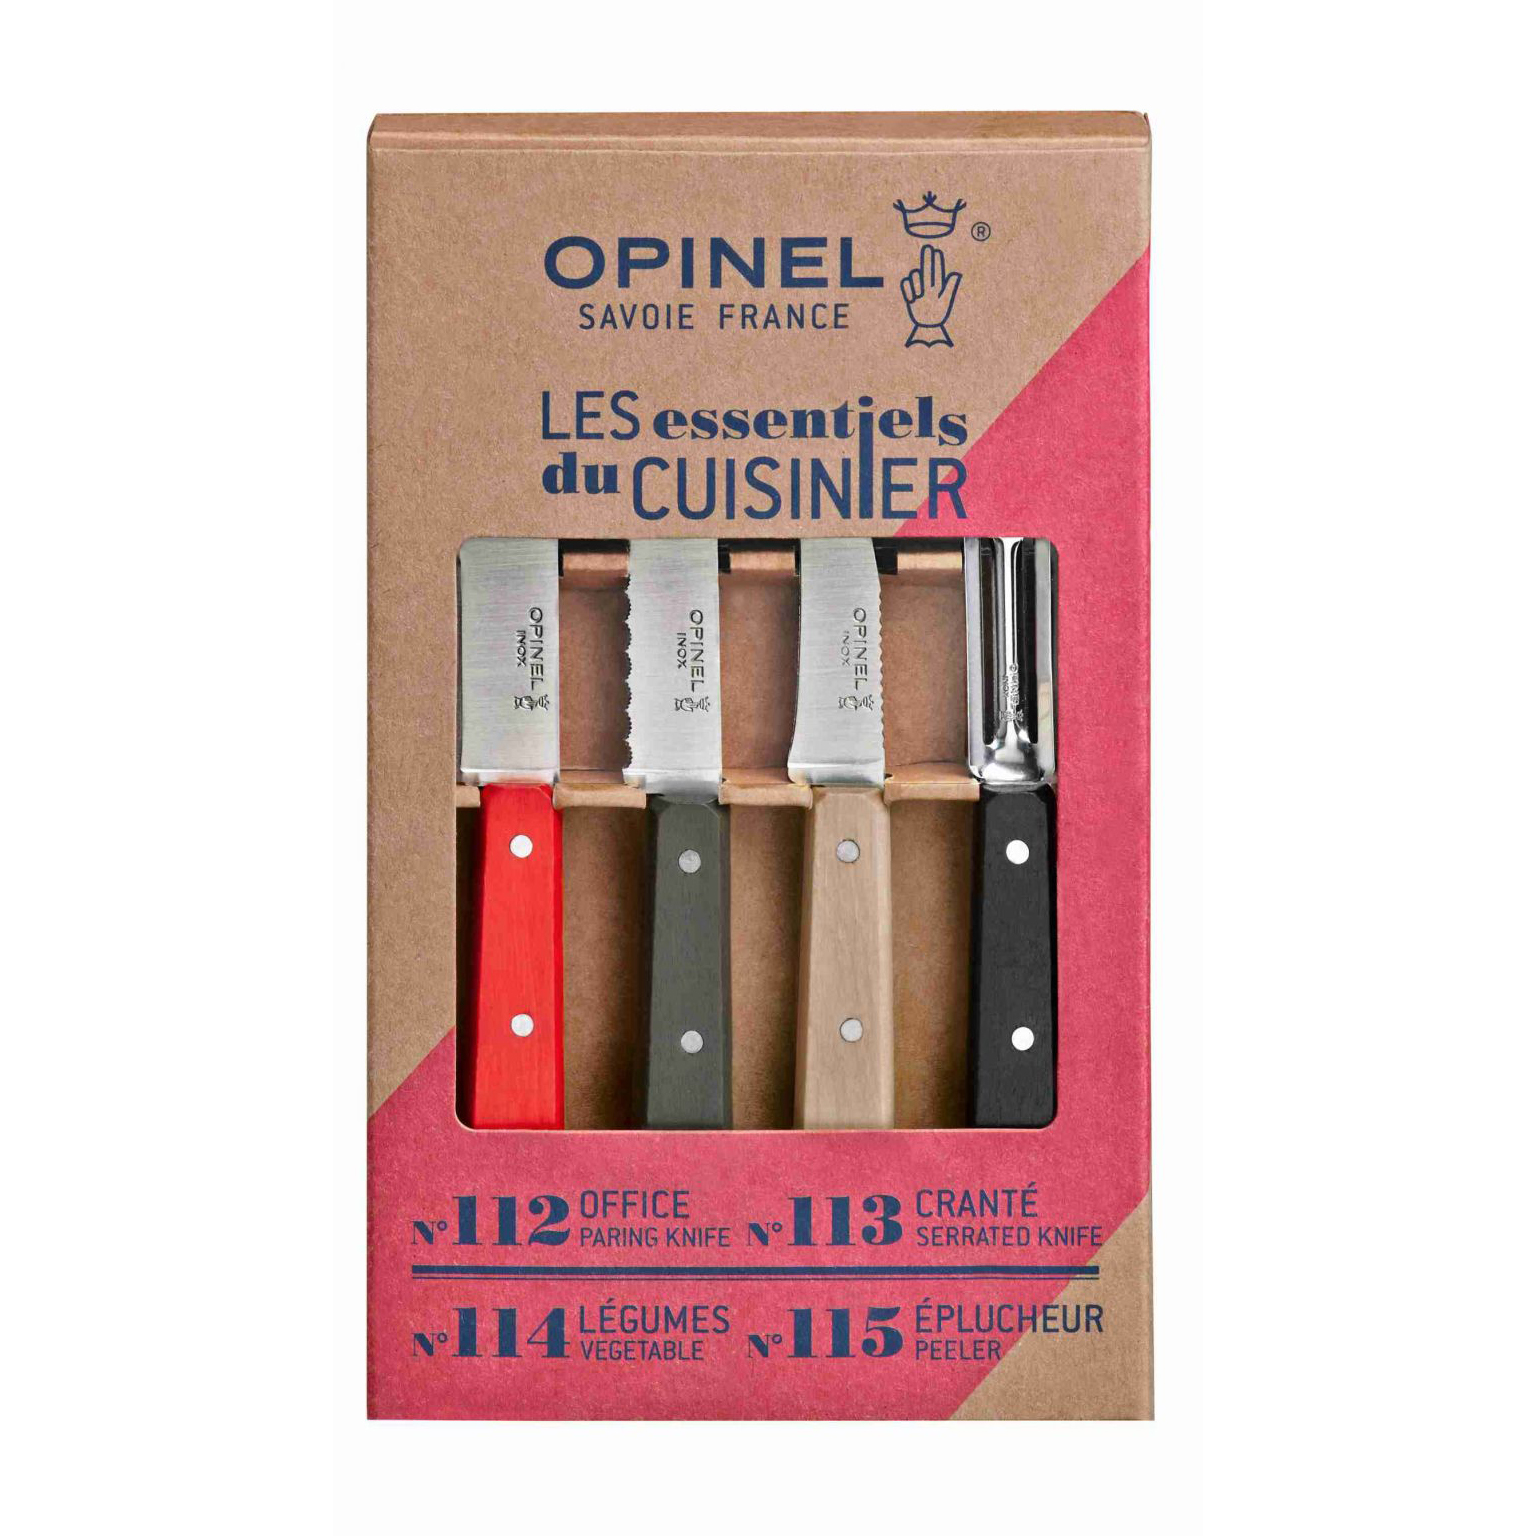 Opinel Kitchen Essentials Knives Loft Set of 4 Product Image 1